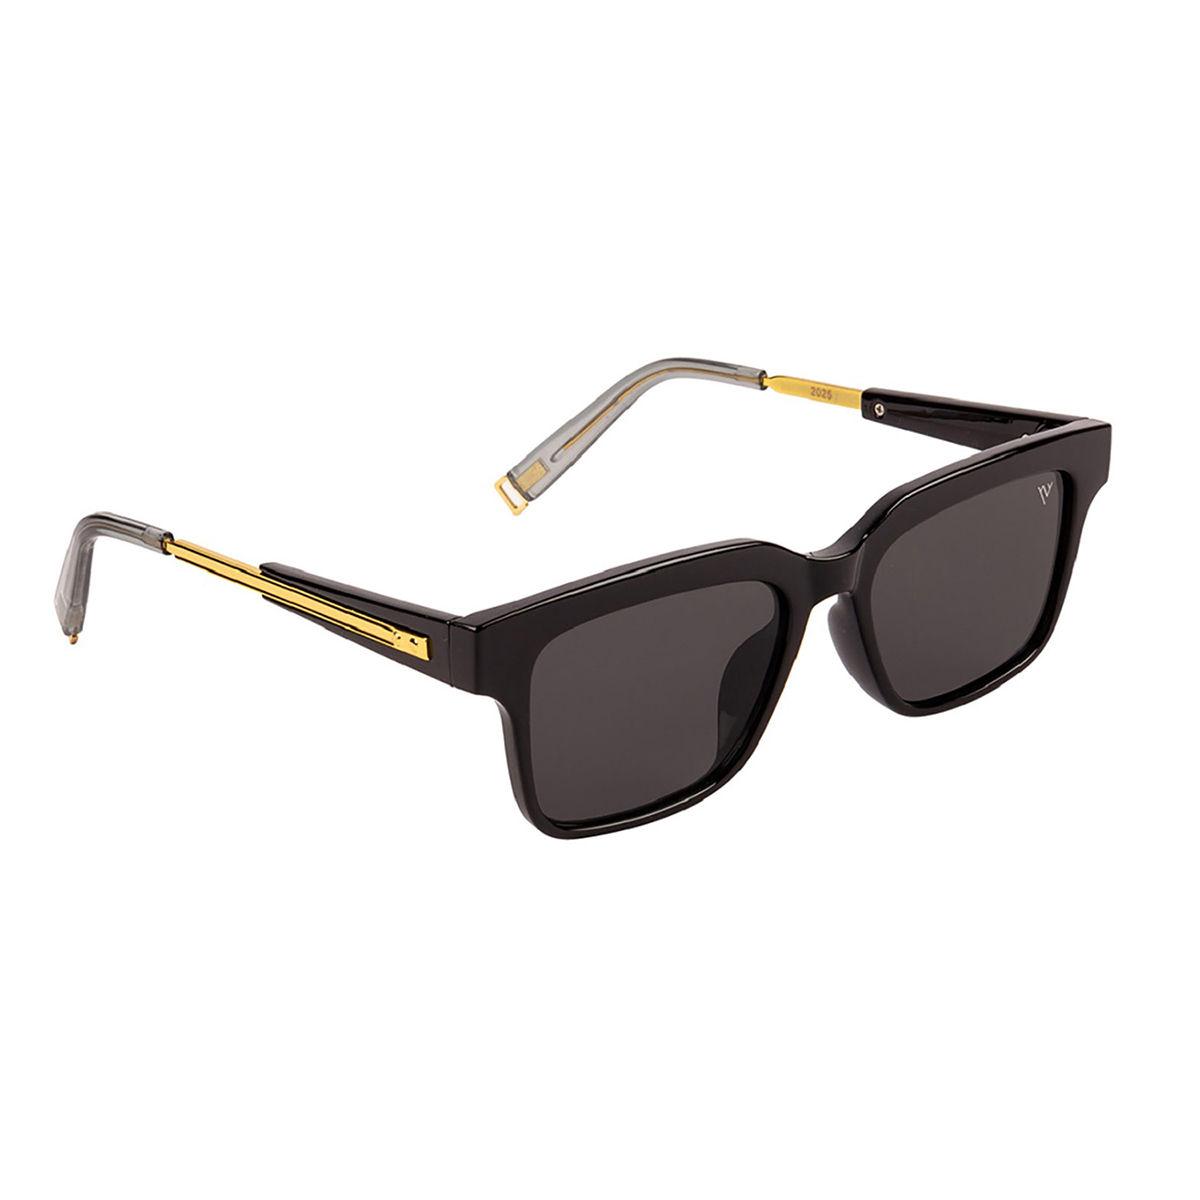 Voyage Unisex Black Lens & Gold-toned Square Sunglasses With UV Protected  Lens Price in India, Full Specifications & Offers | DTashion.com